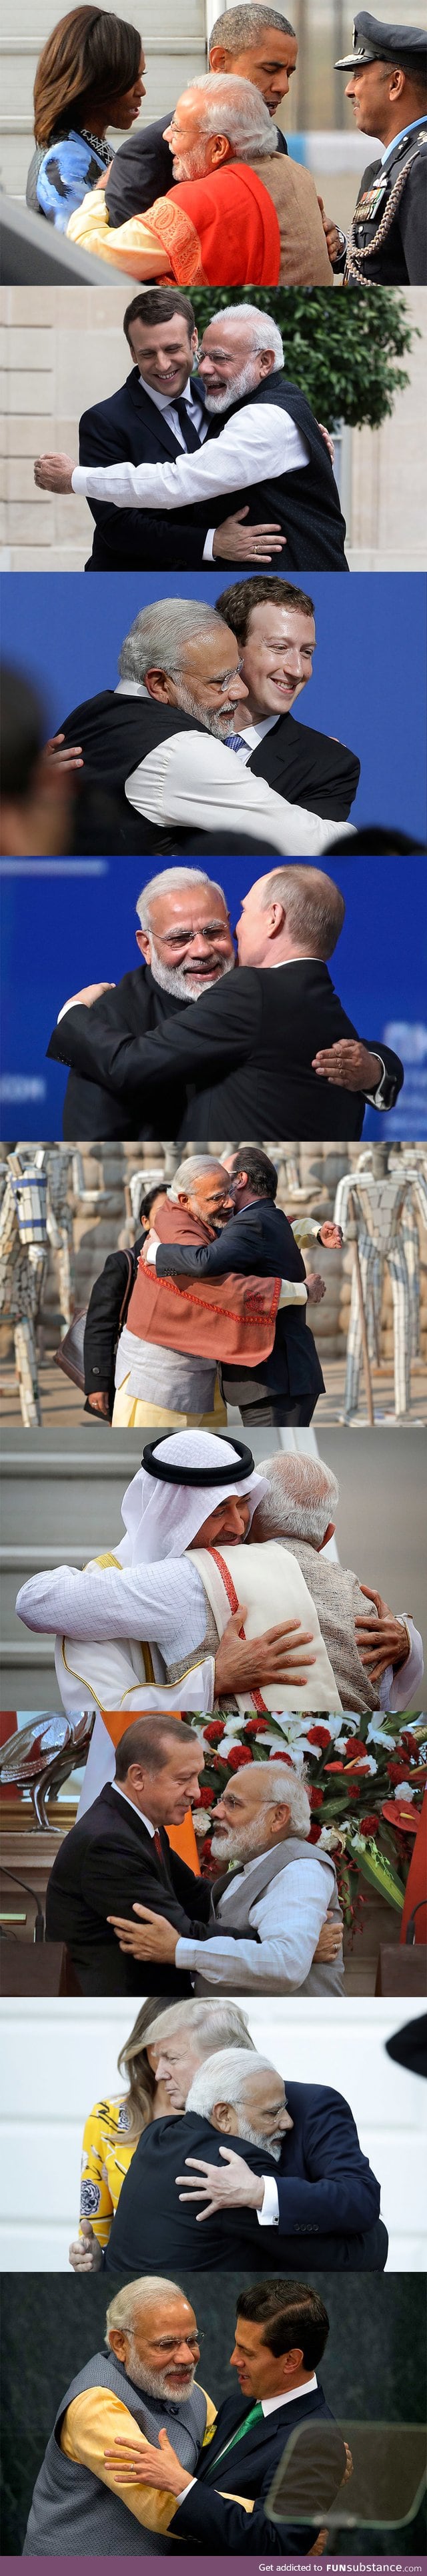 The Prime Minister of India doesn't care who you are, he just wants to hug you